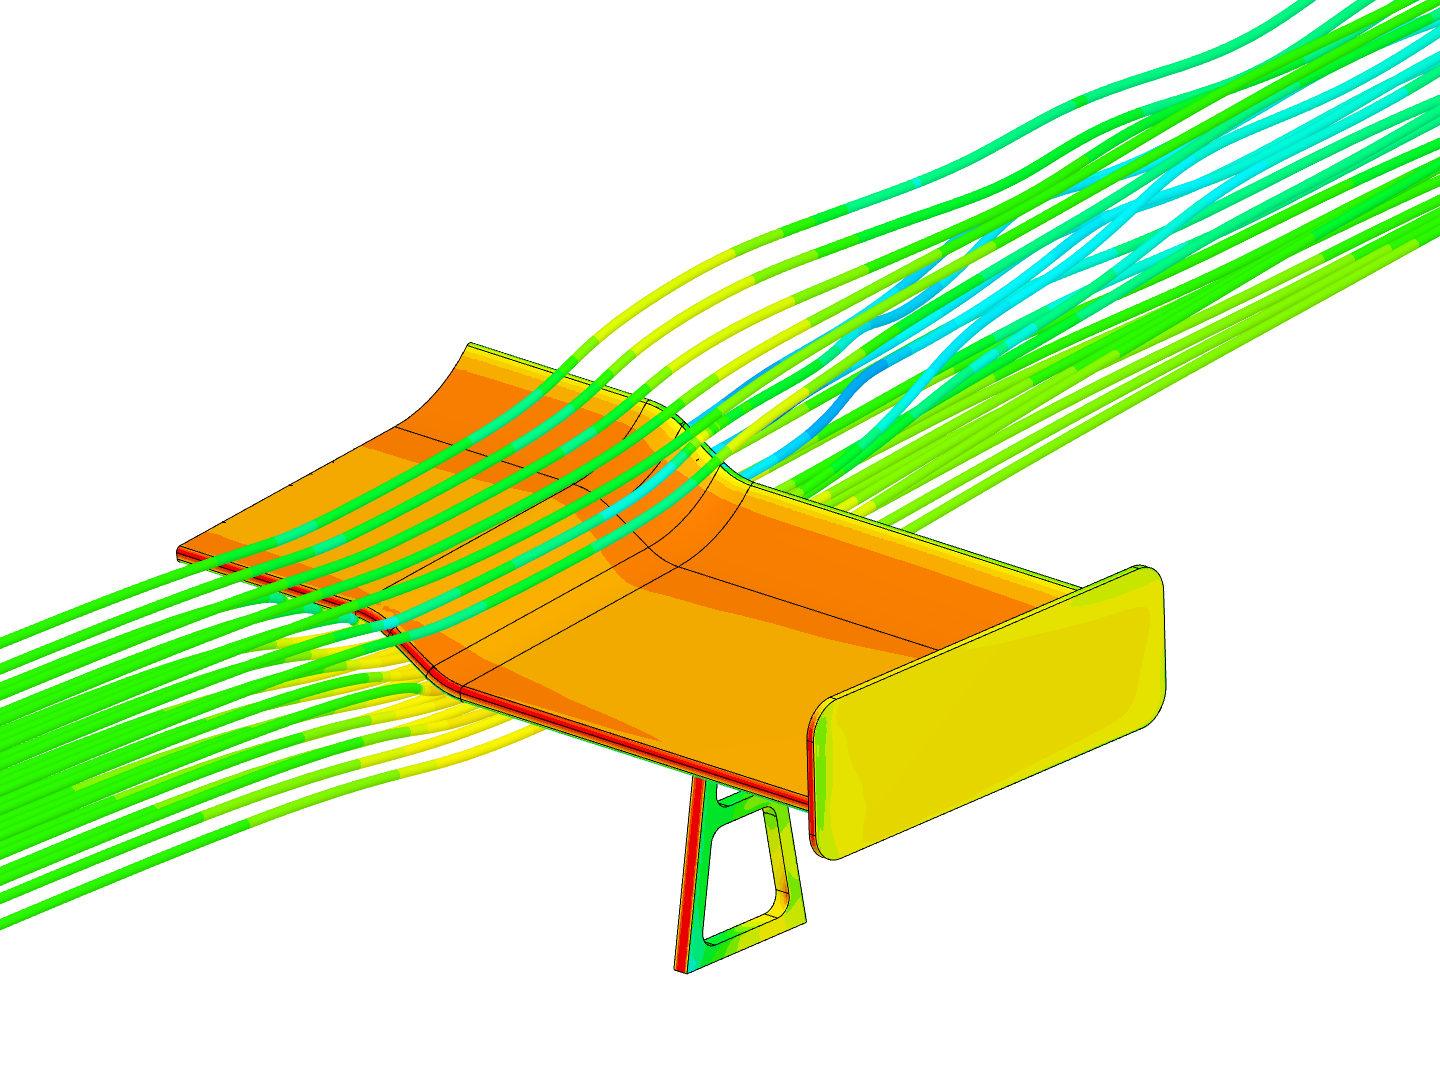 Airflow around a spoiler-Sample project image